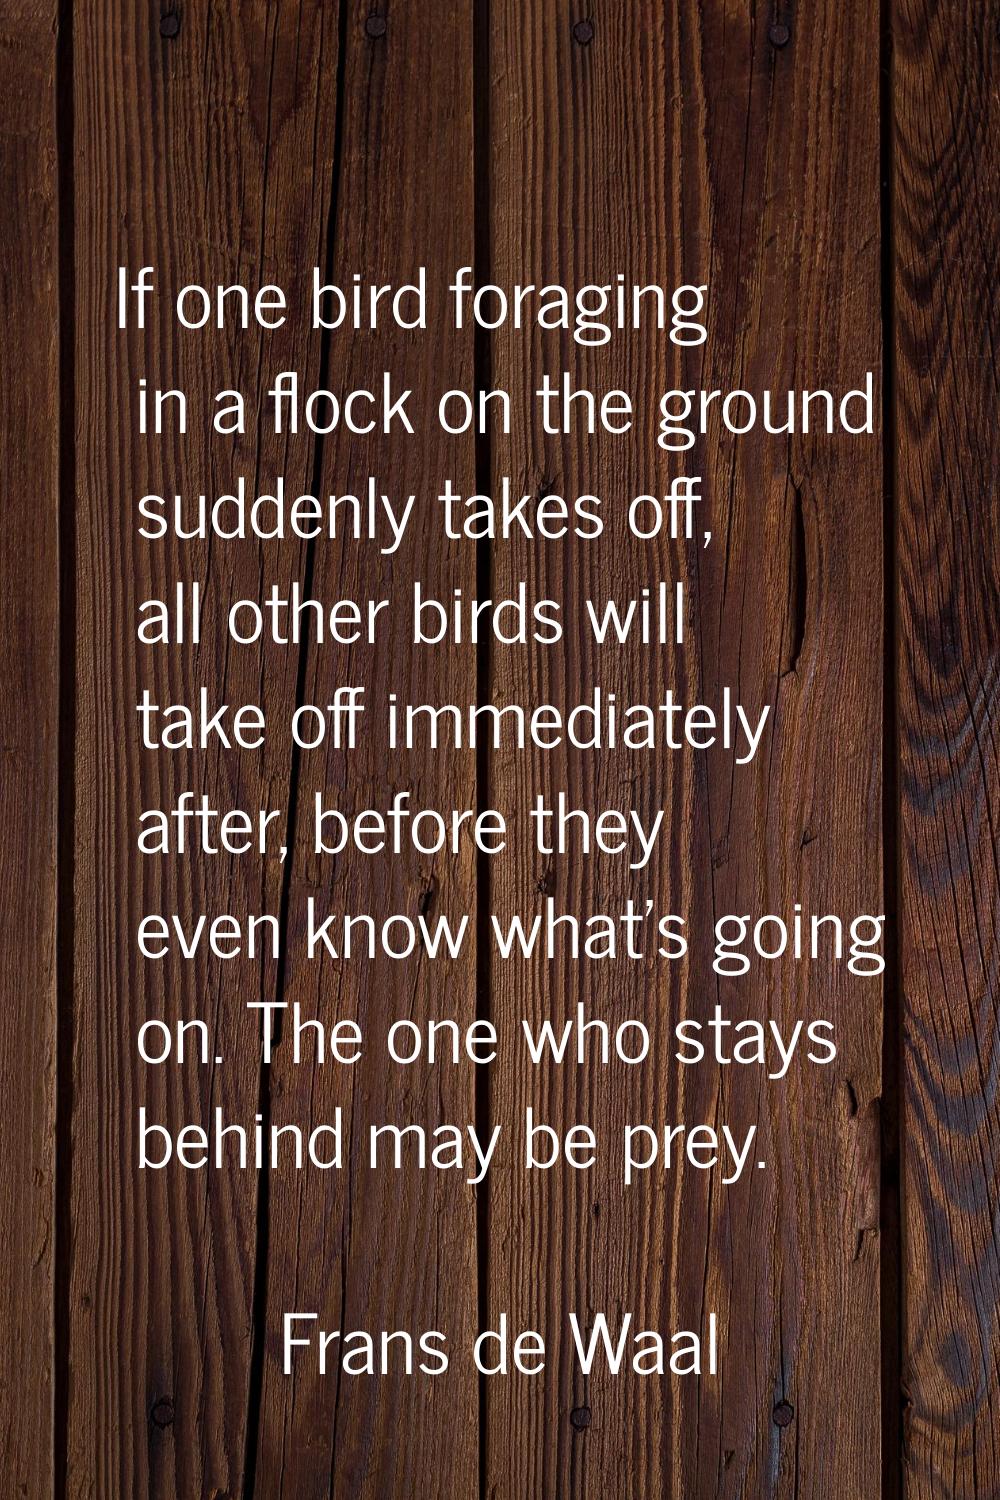 If one bird foraging in a flock on the ground suddenly takes off, all other birds will take off imm